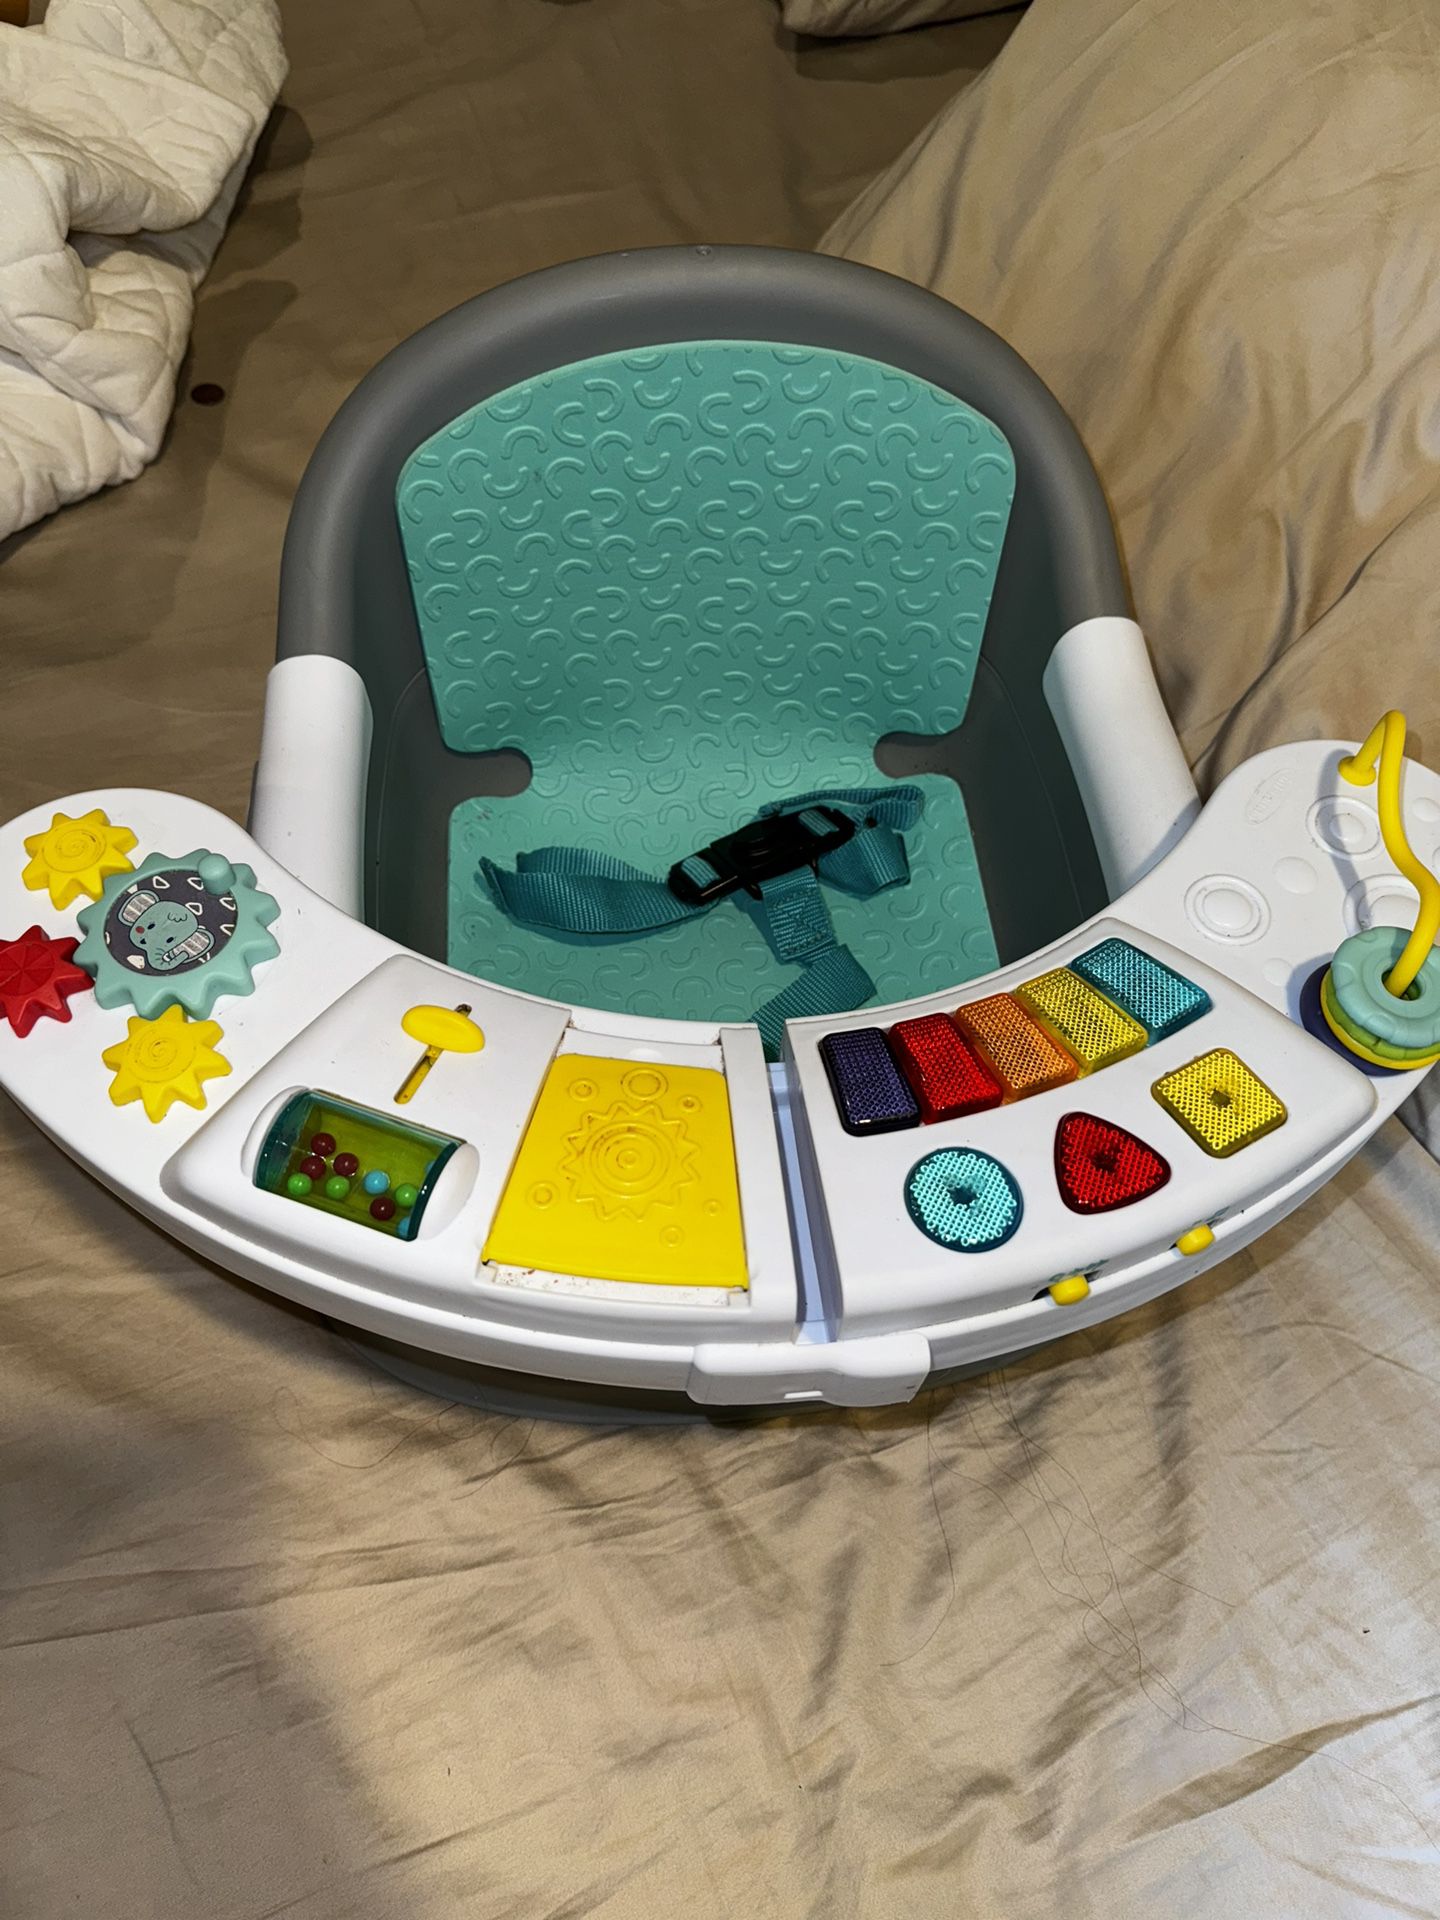 Baby Booster Chair / Floor Seat